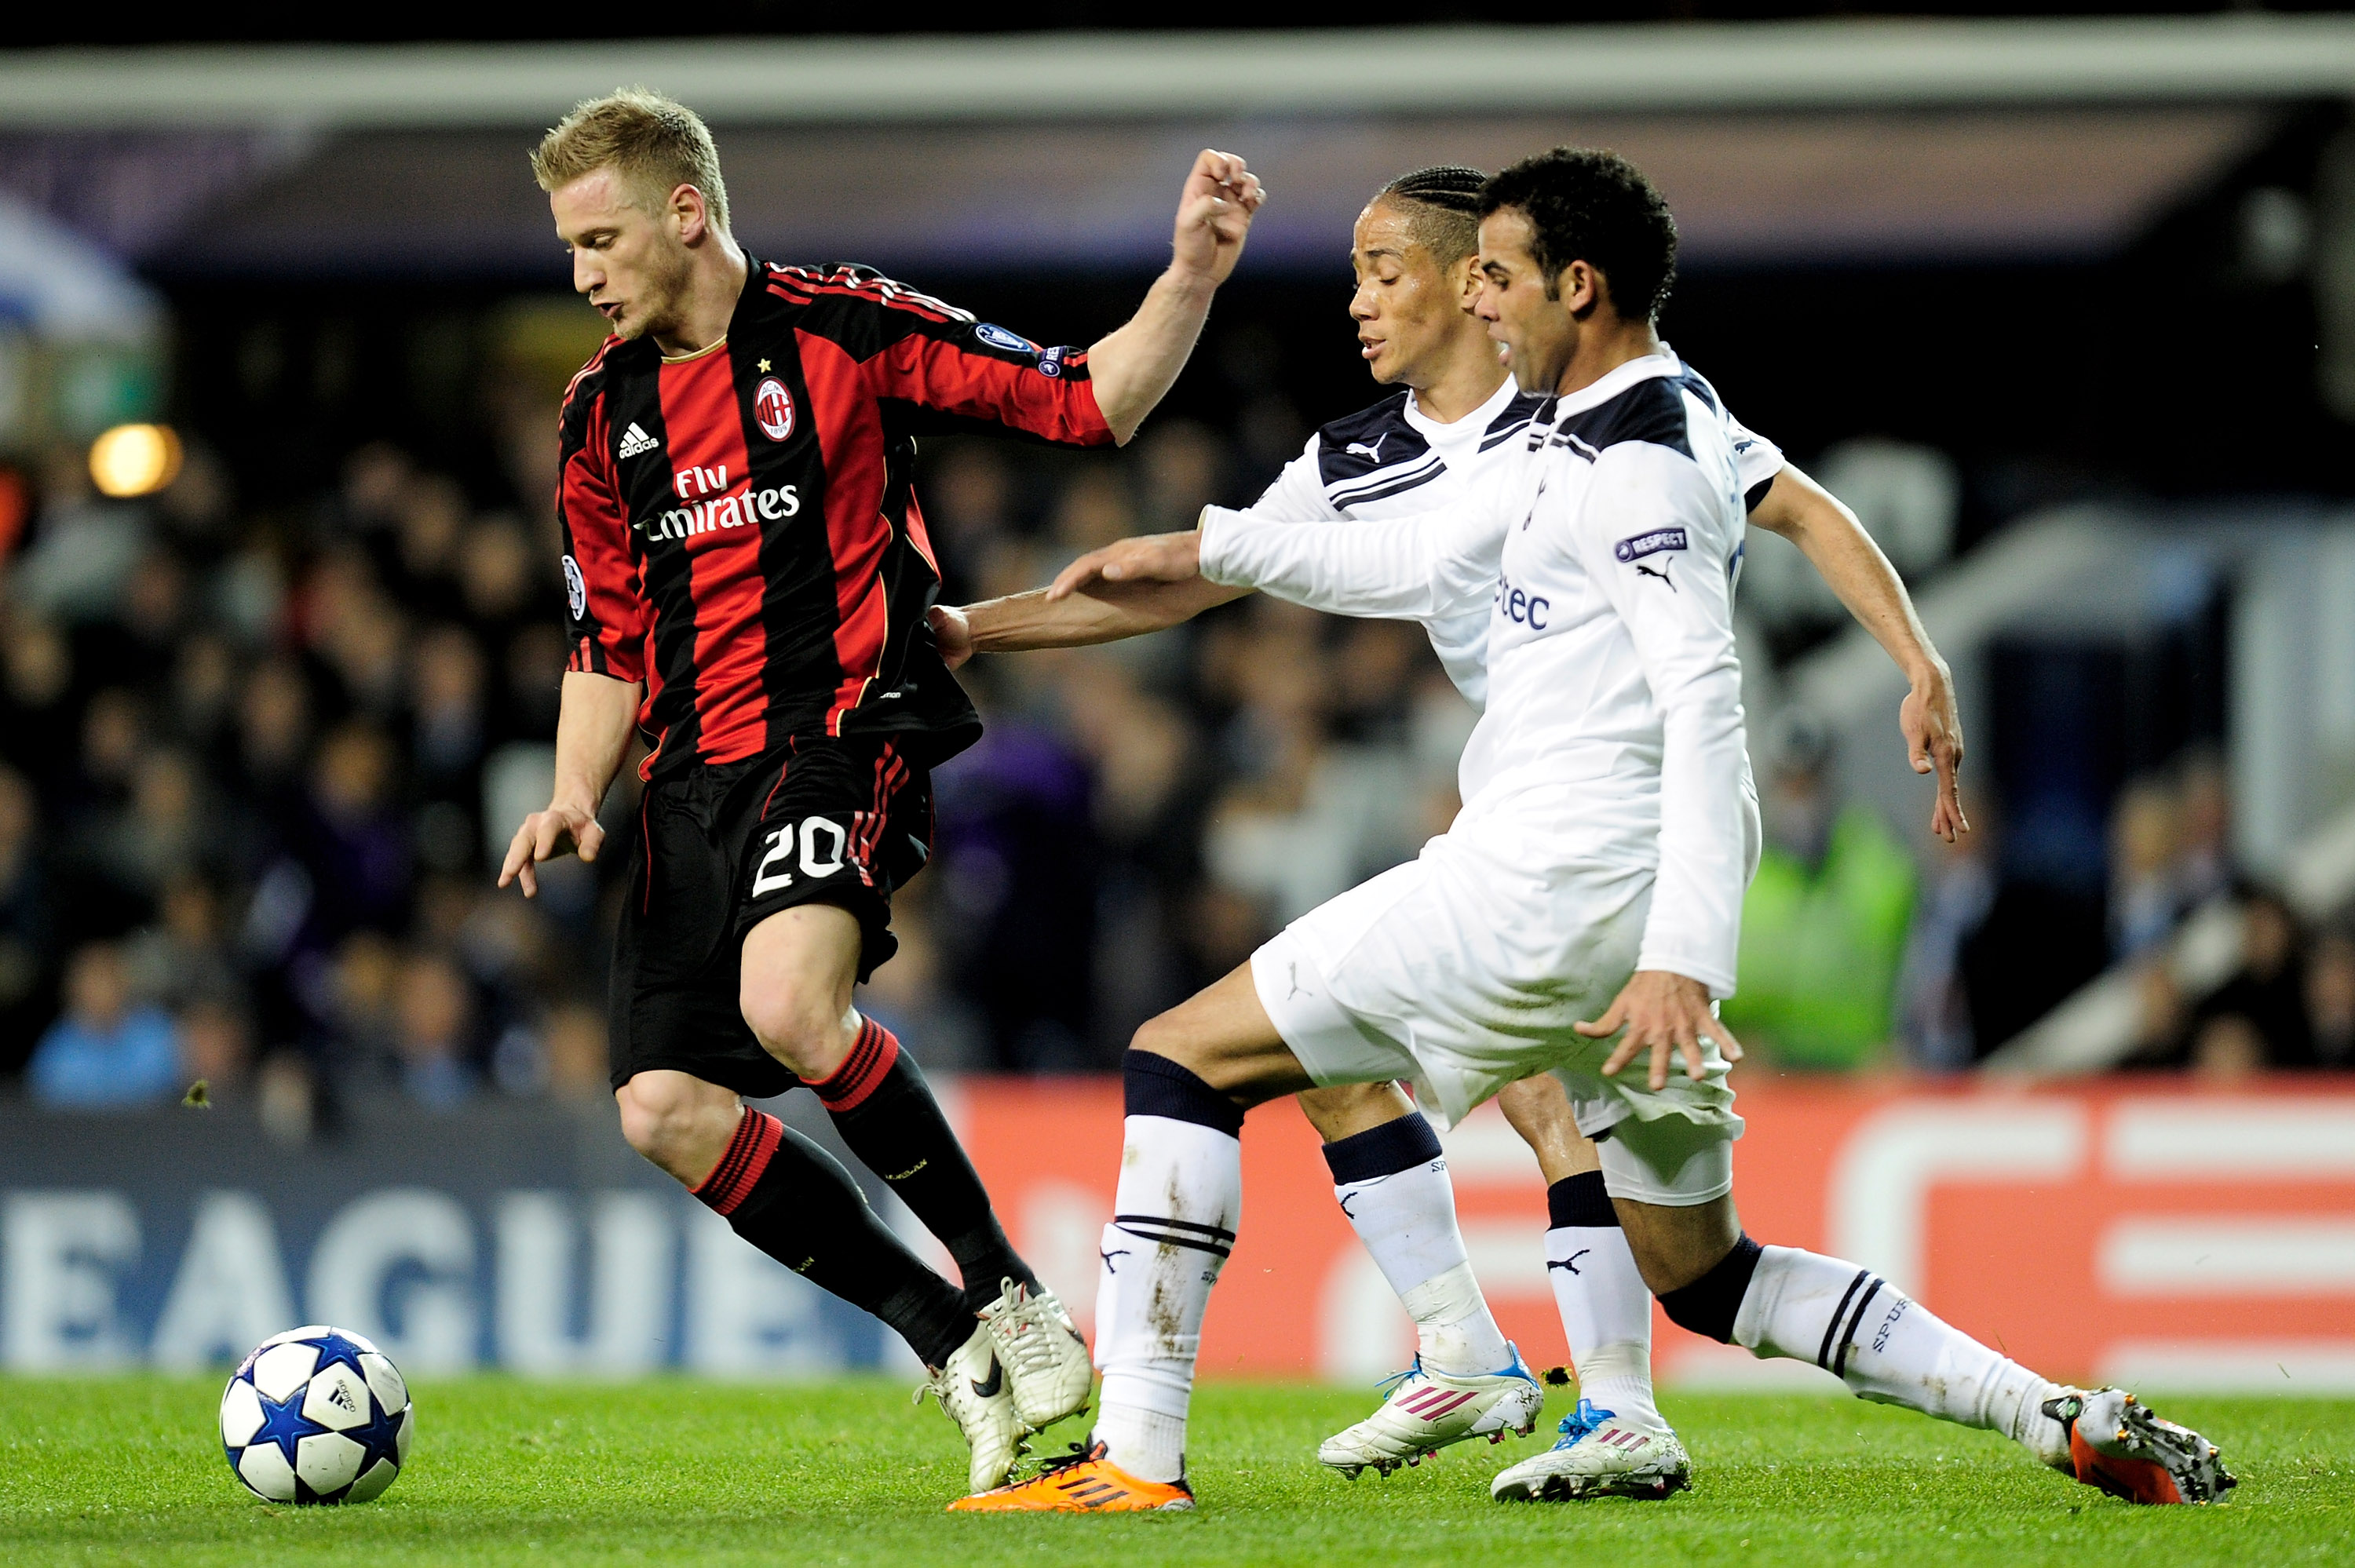 LONDON, ENGLAND - MARCH 09:  Steven Pienaar (2R) and Sandro (R) of Tottenham challenge Ignazio Abate of Milan during the UEFA Champions League round of 16 second leg match between Tottenham Hotspur and AC Milan at White Hart Lane on March 9, 2011 in Londo